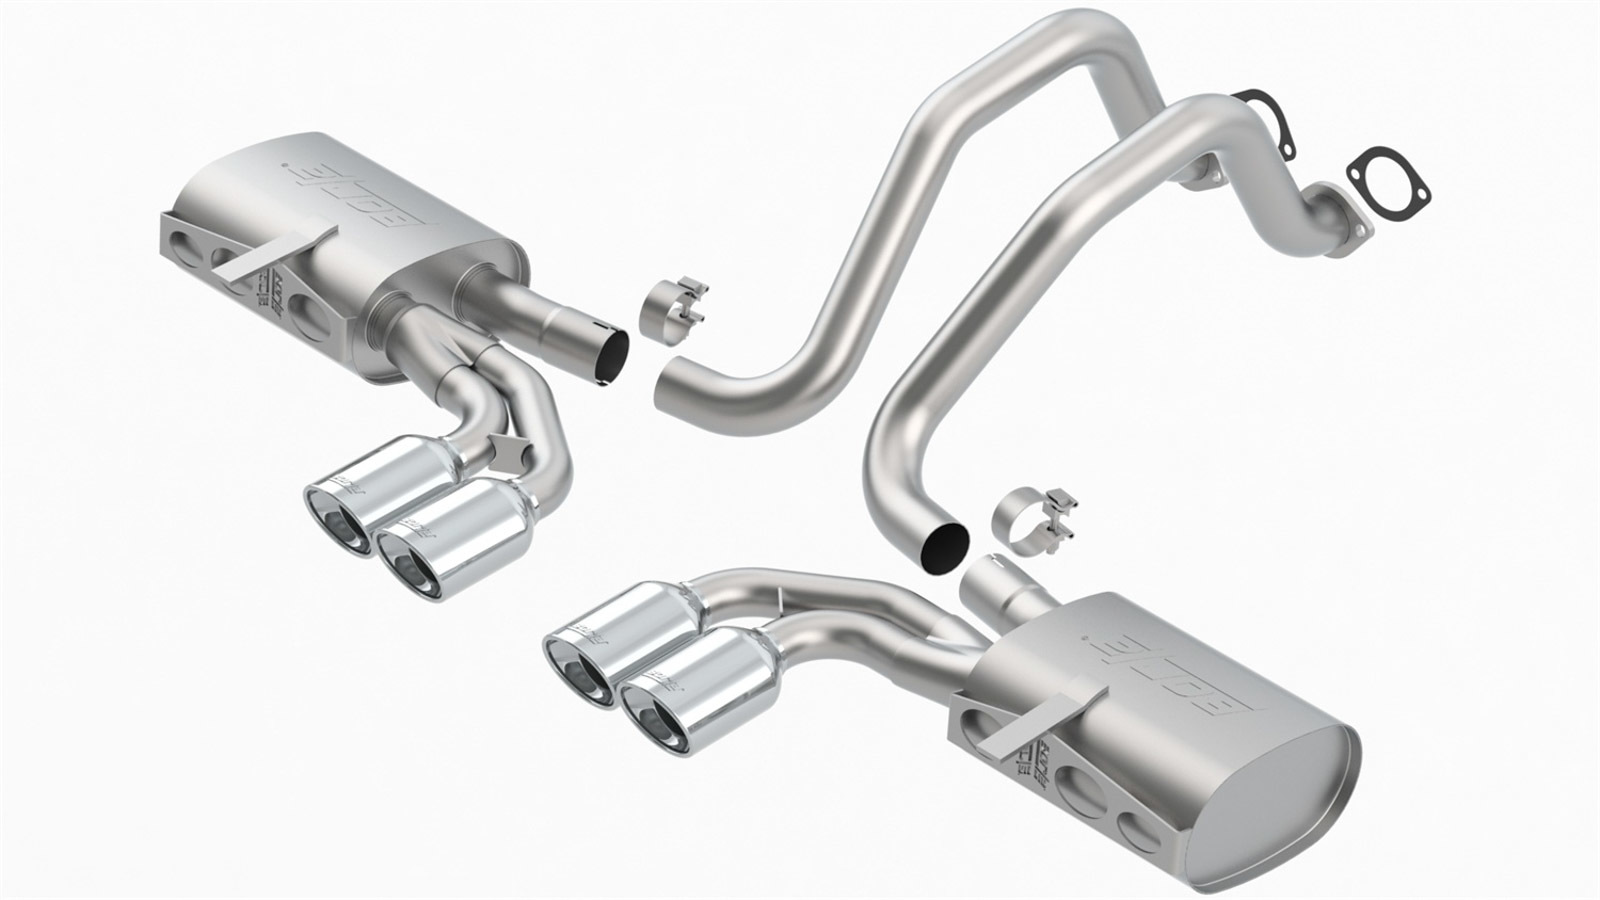 Borla 140427 Exhaust System, S-Type II, Cat-Back, 2-1/2 in Diameter, Dual Center Exit, Quad 4-1/4 in Polished Tips, Stainless, Natural, GM LS-Series, Chevy Corvette 1997-2004, Kit